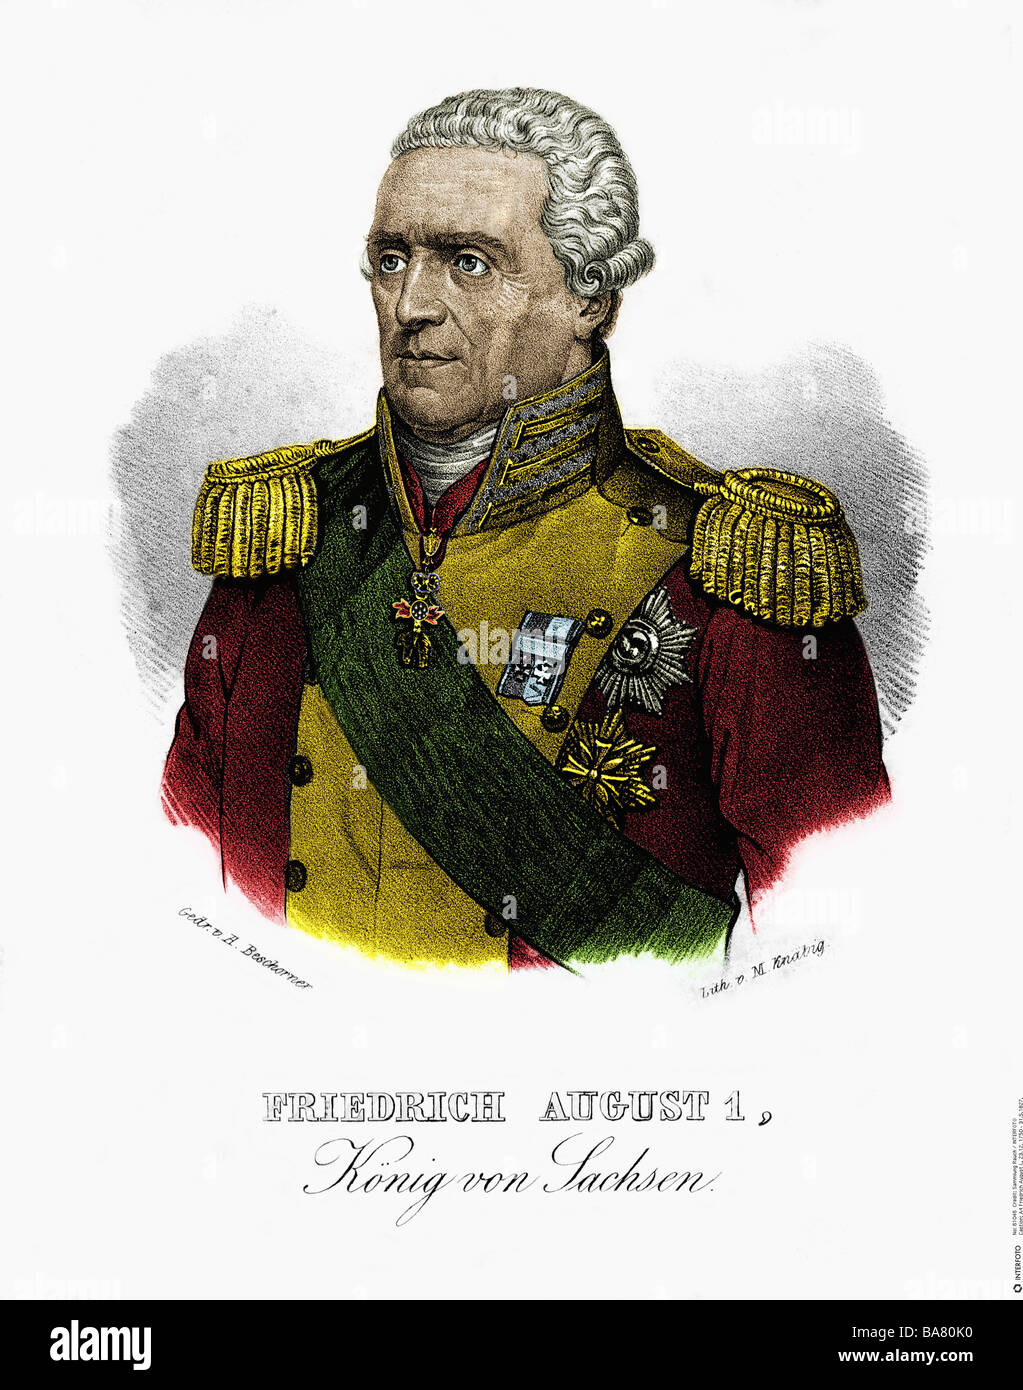 Frederick Augustus I, 23.12.1750 - 31.5.1827, King of Saxony 11.12.1806 - 31.5.1827, portrait, lithograph, by M. Knaebig, early 19th century, later coloured, Stock Photo